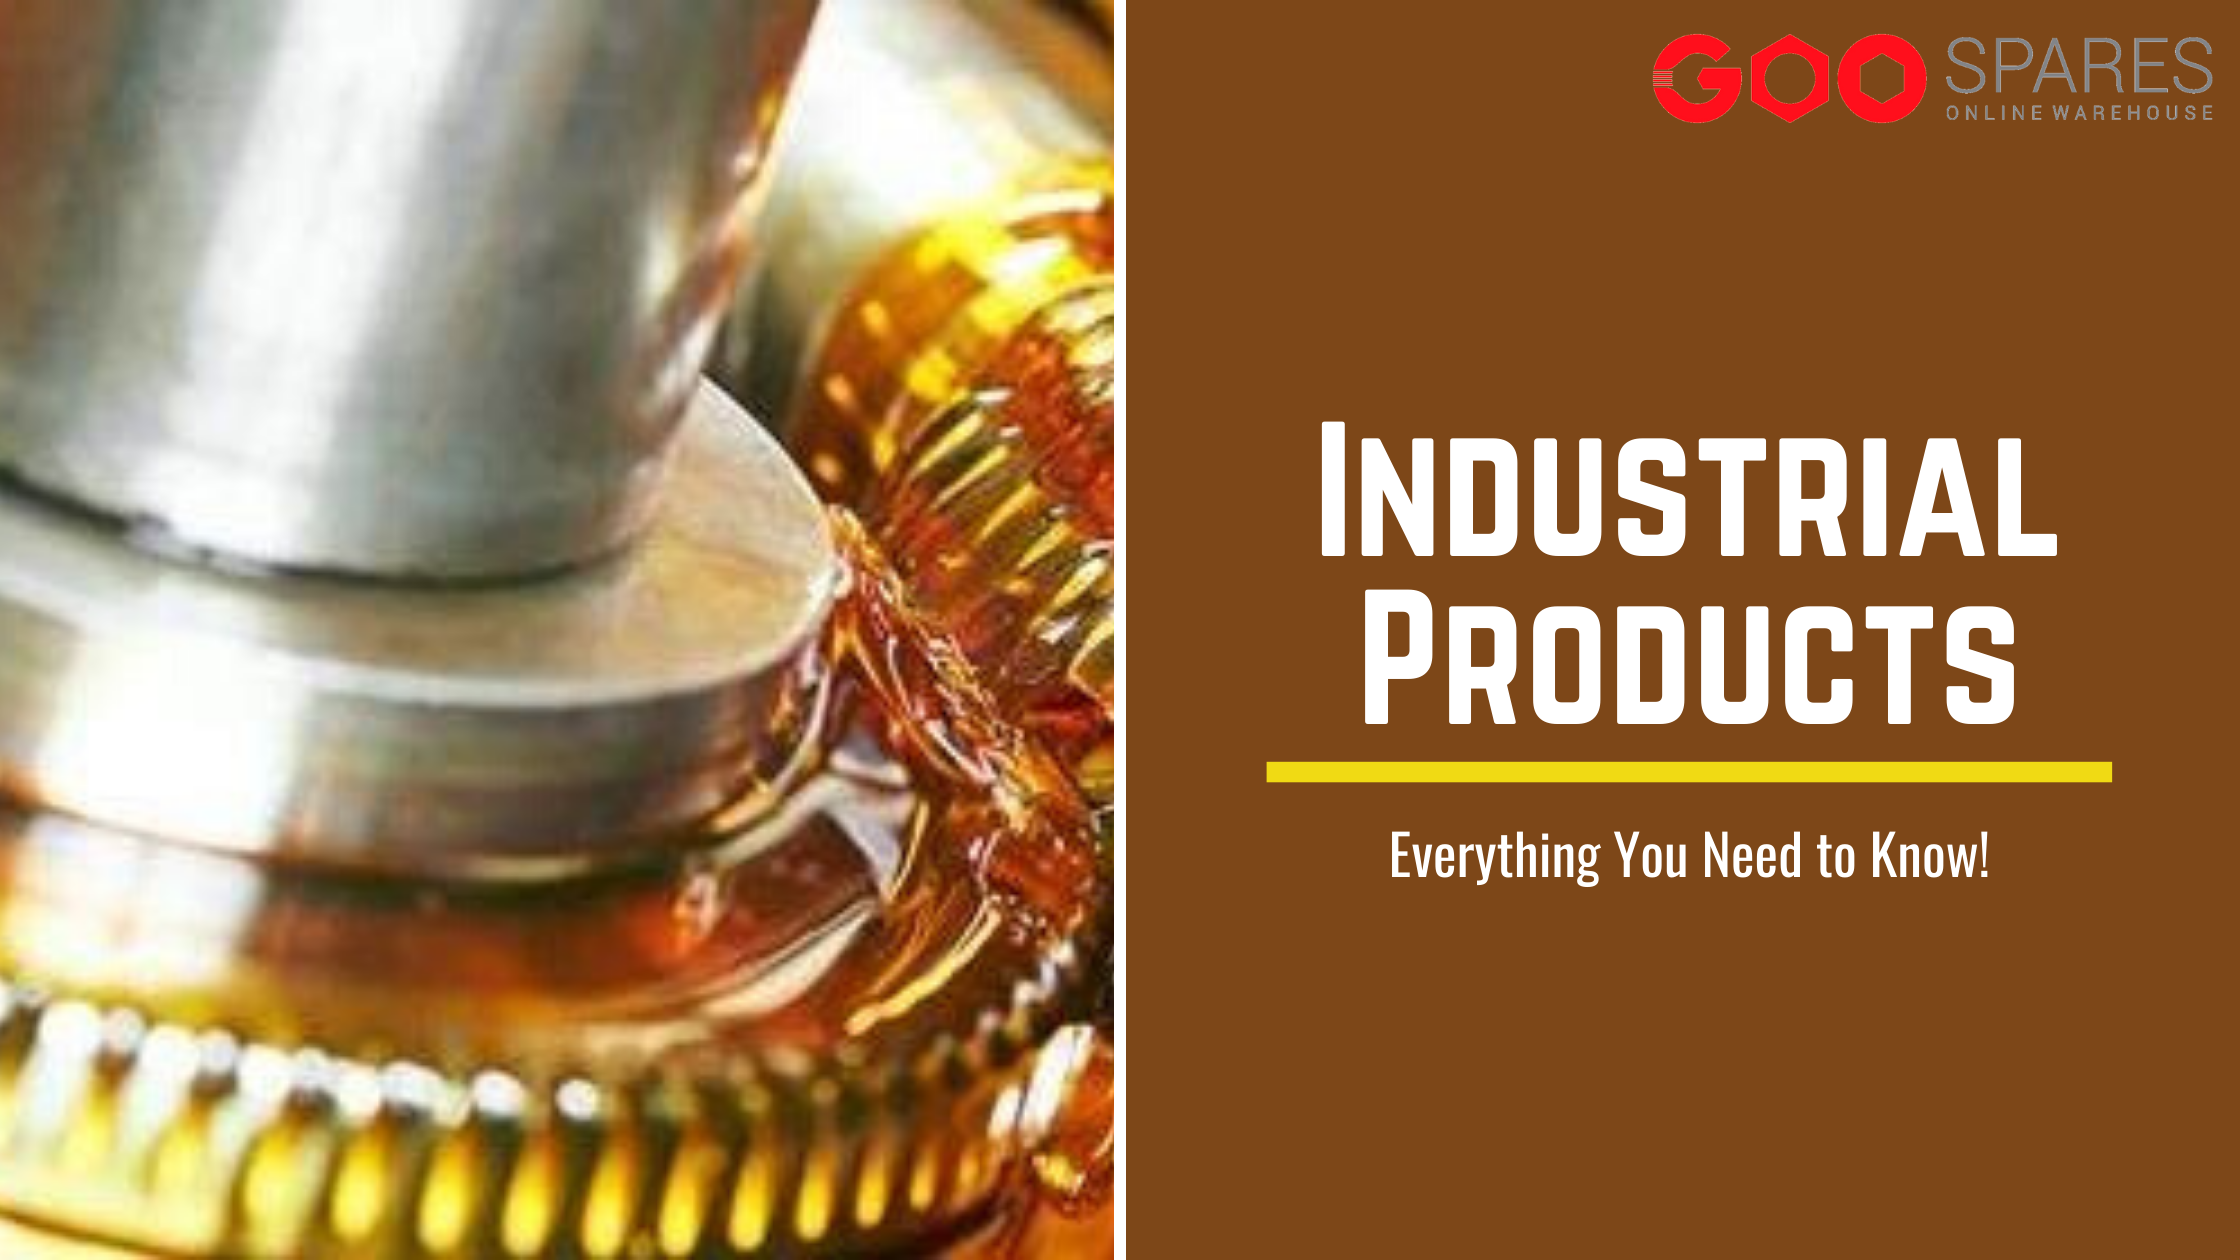 Everything You Need to Know About Industrial Products